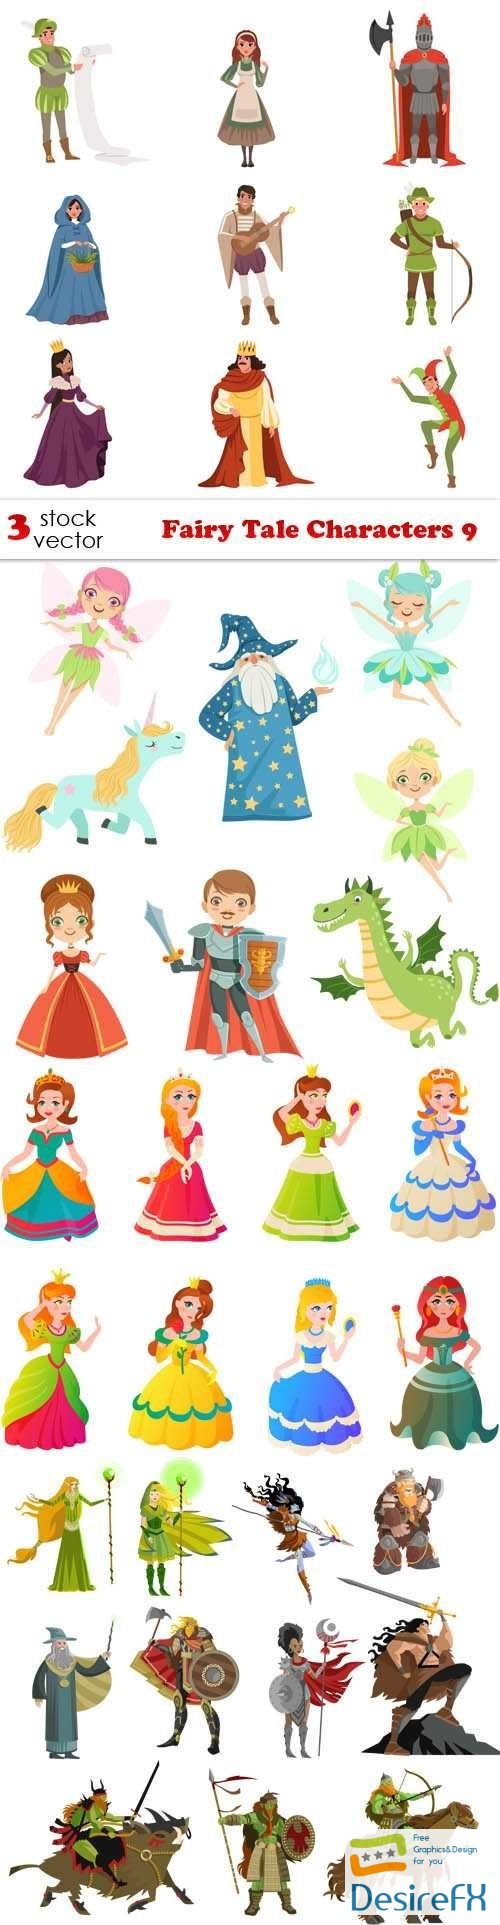 Fairy Tale Characters 9